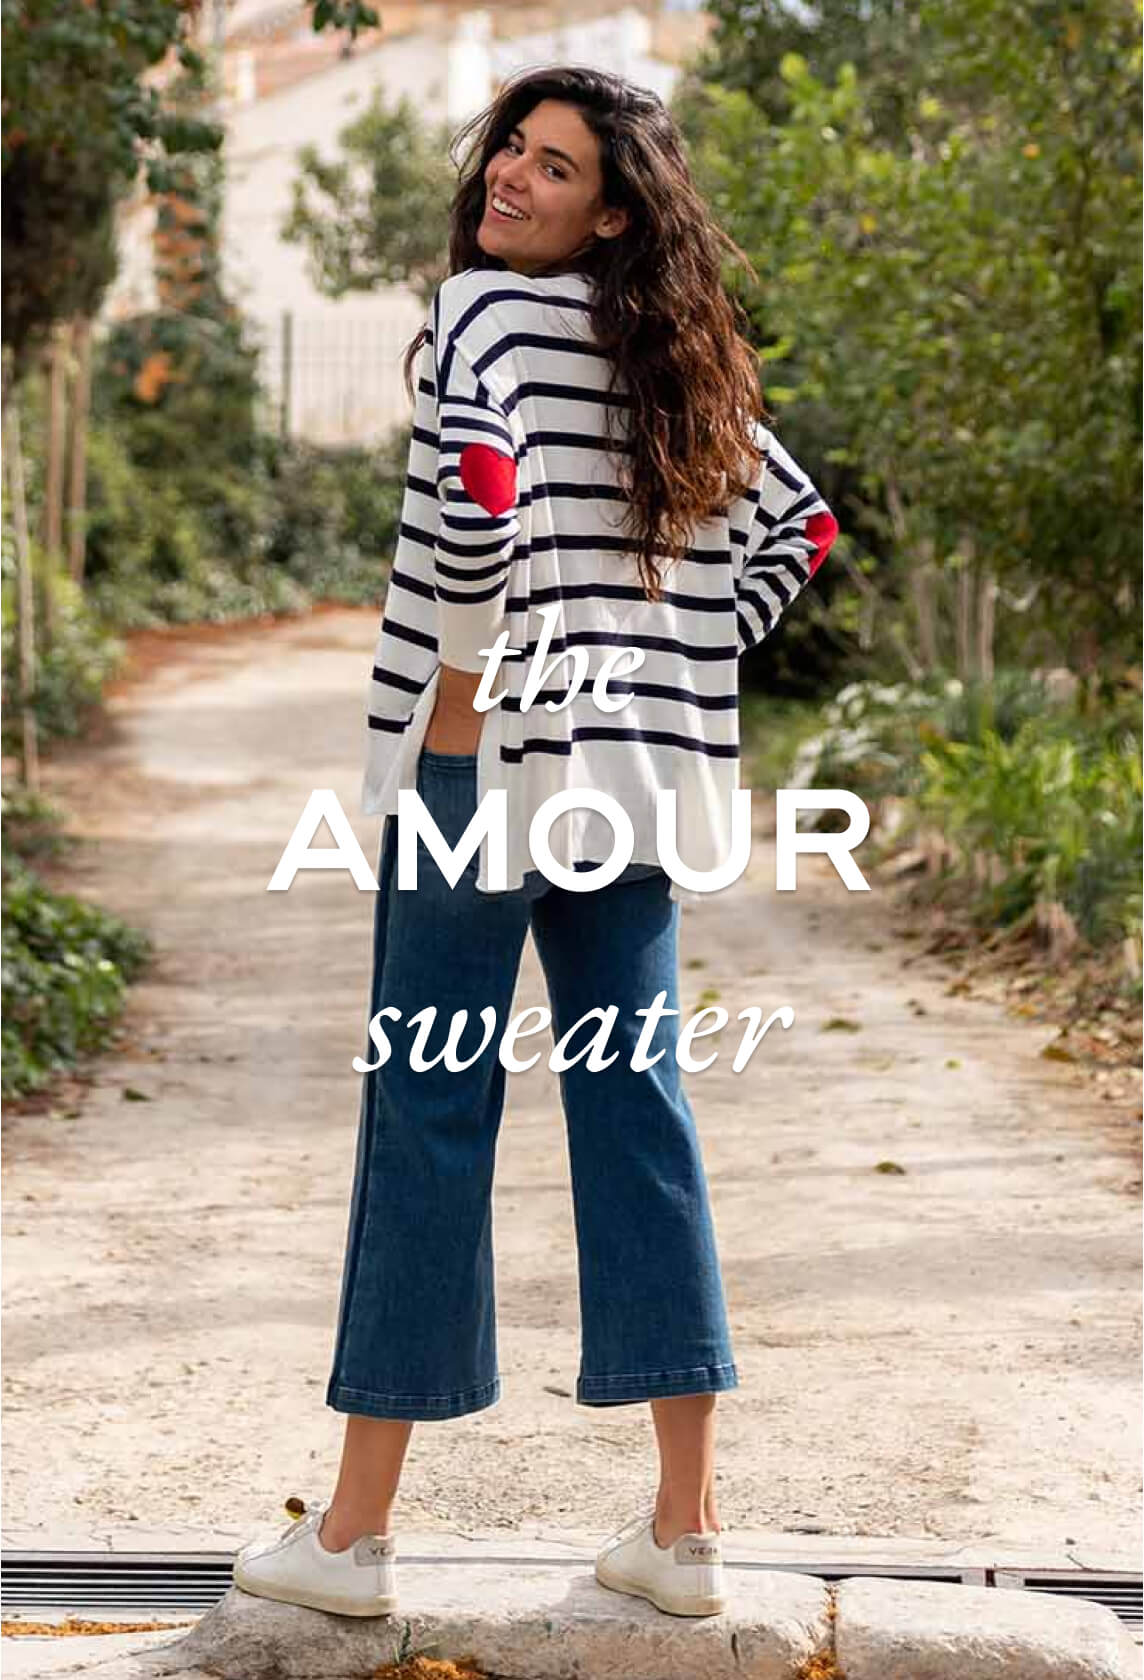 rearview of woman wearing mersea amour sweater in white and navy stripe with red hearts on elbows